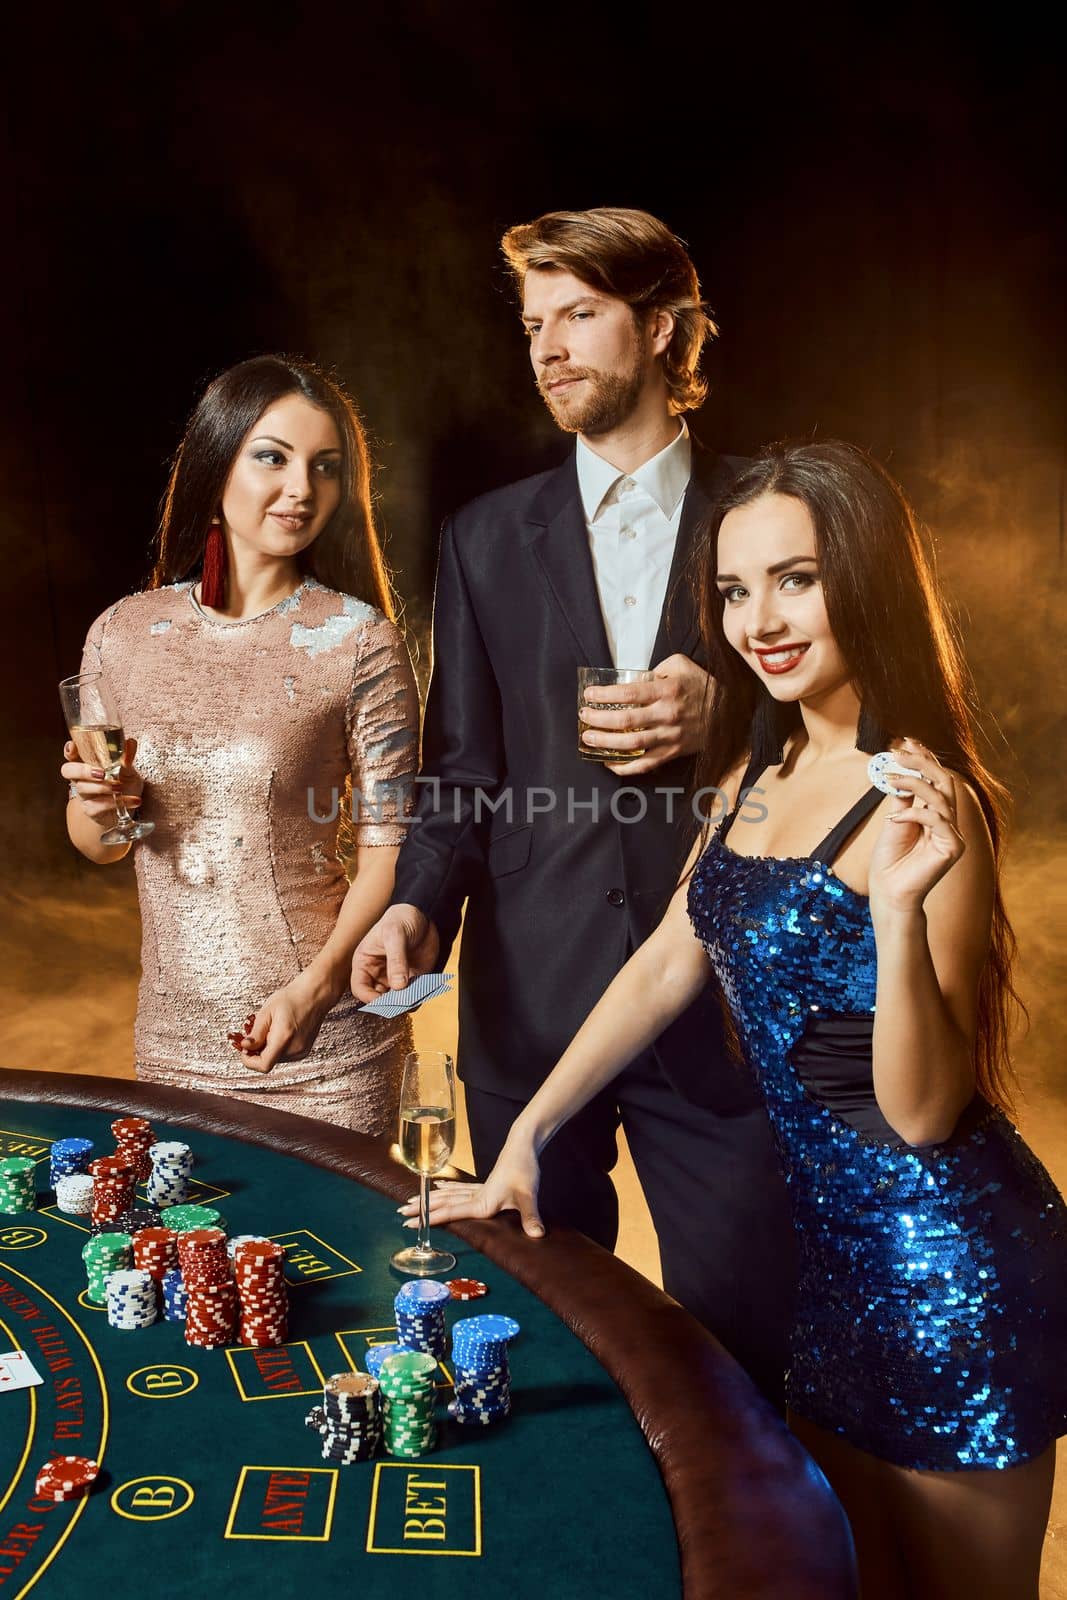 Two beautiful women and young man play on poker table in casino, focus on man and brunette by nazarovsergey